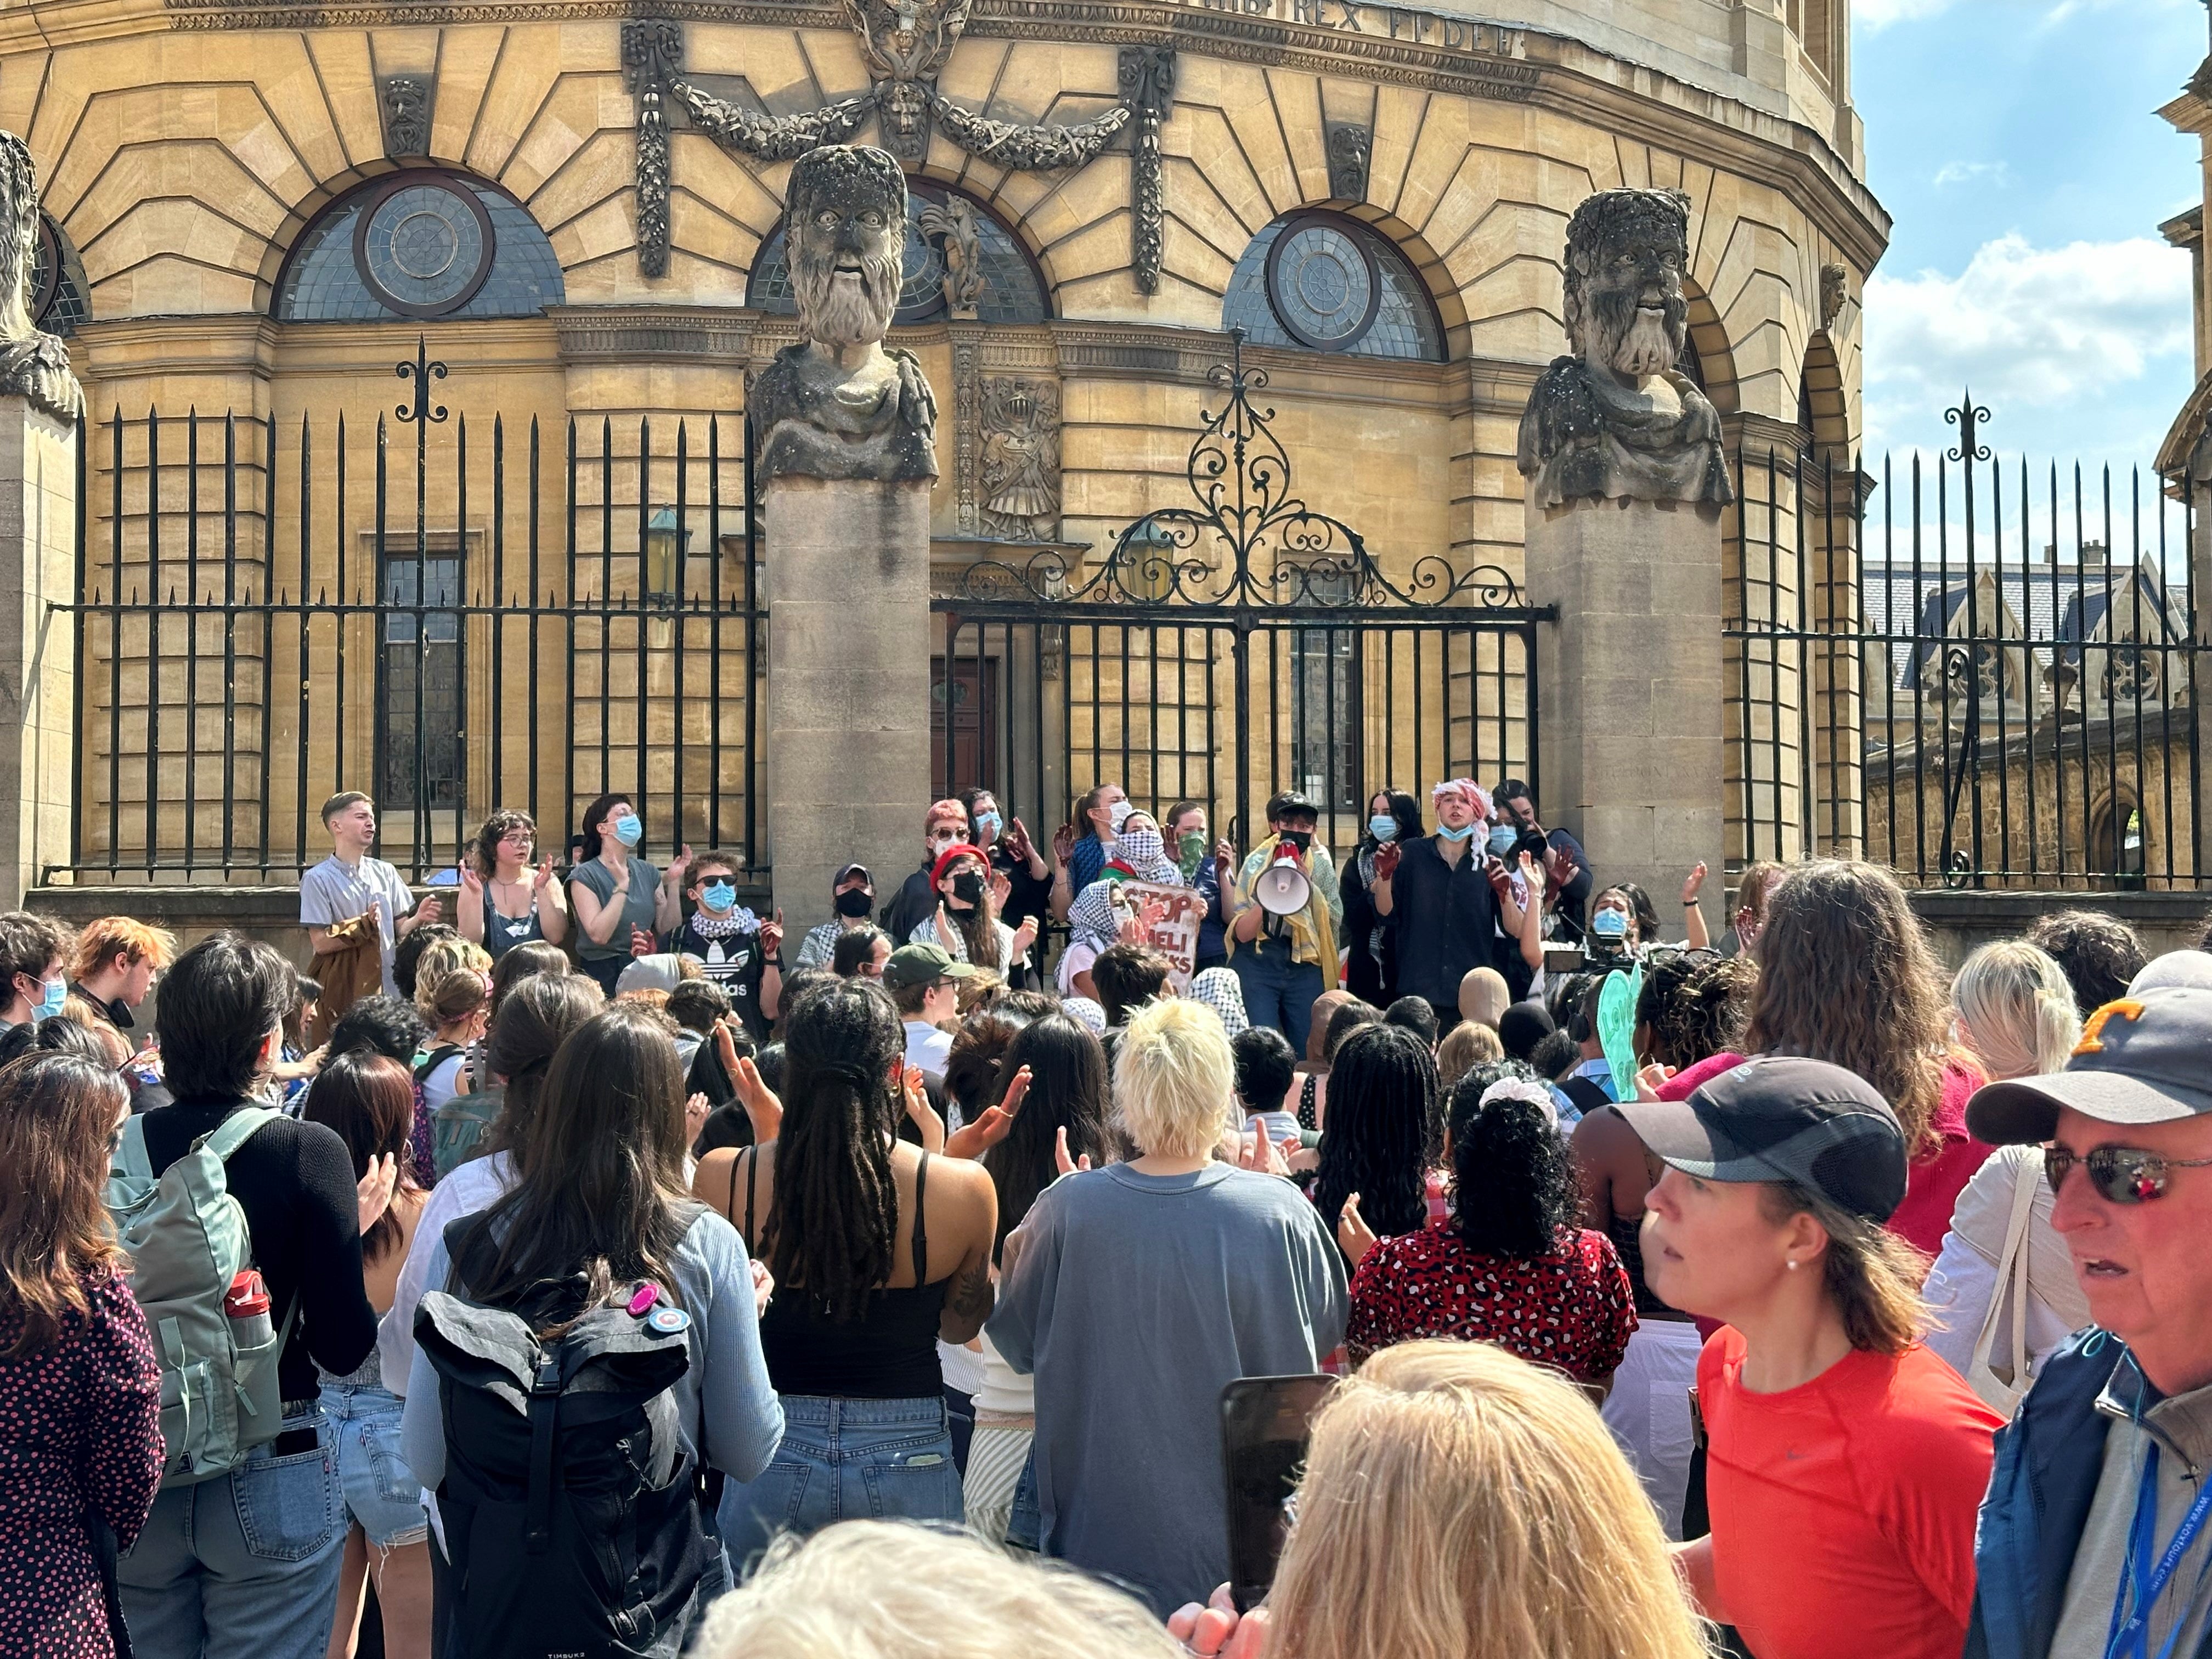 Protesters chant slogans outside the Sheldonian Theatre, as the vice-chancellor of Oxford University attended a ceremony